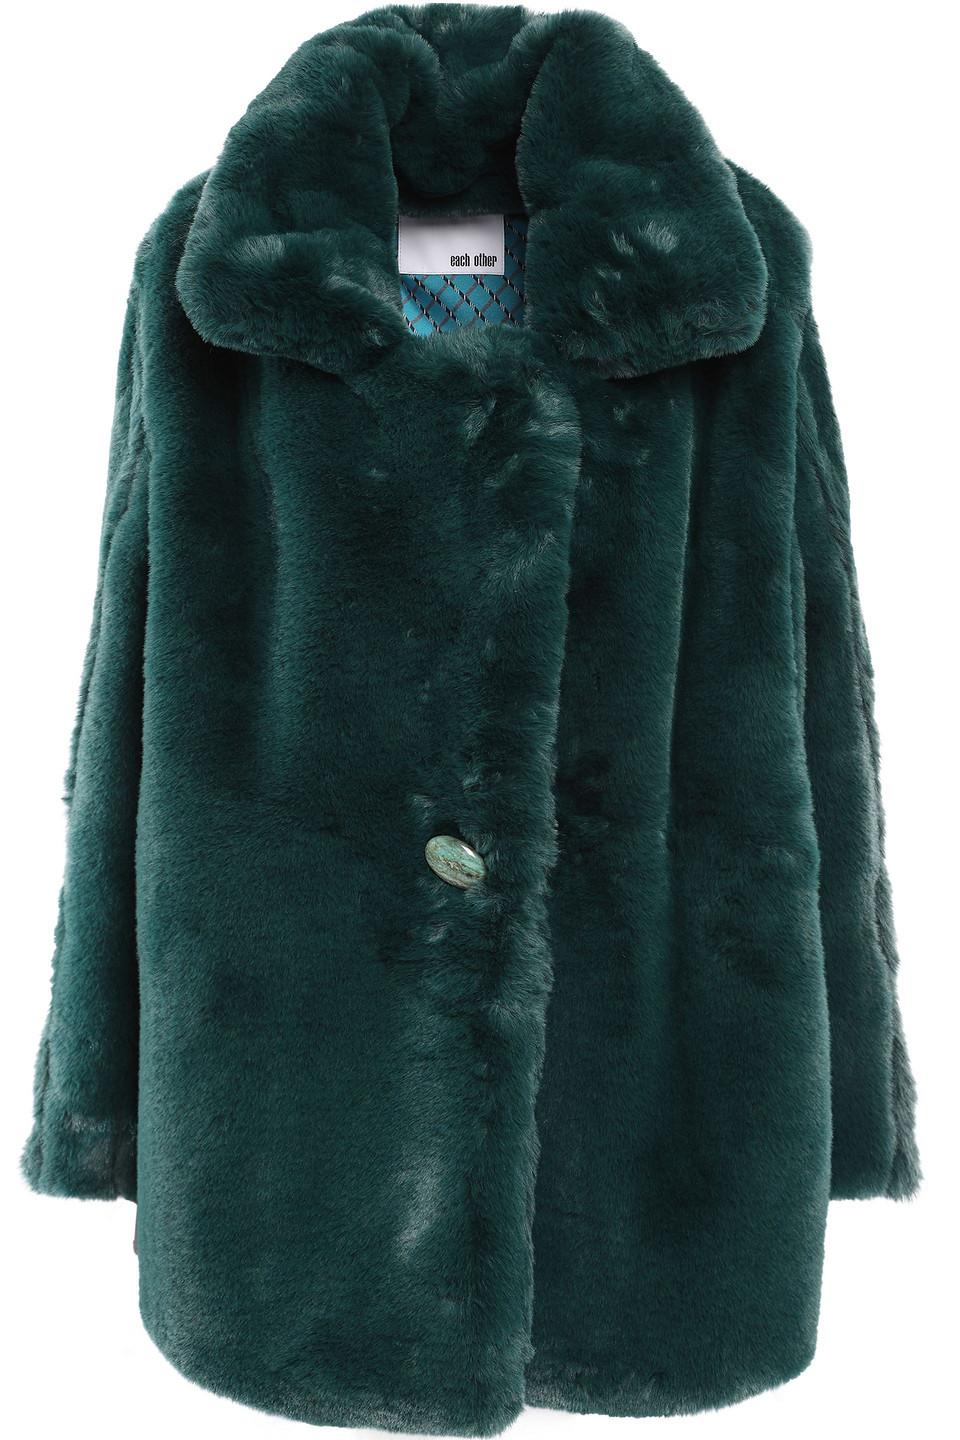 Each x Other Faux Fur Coat Emerald in Green - Lyst